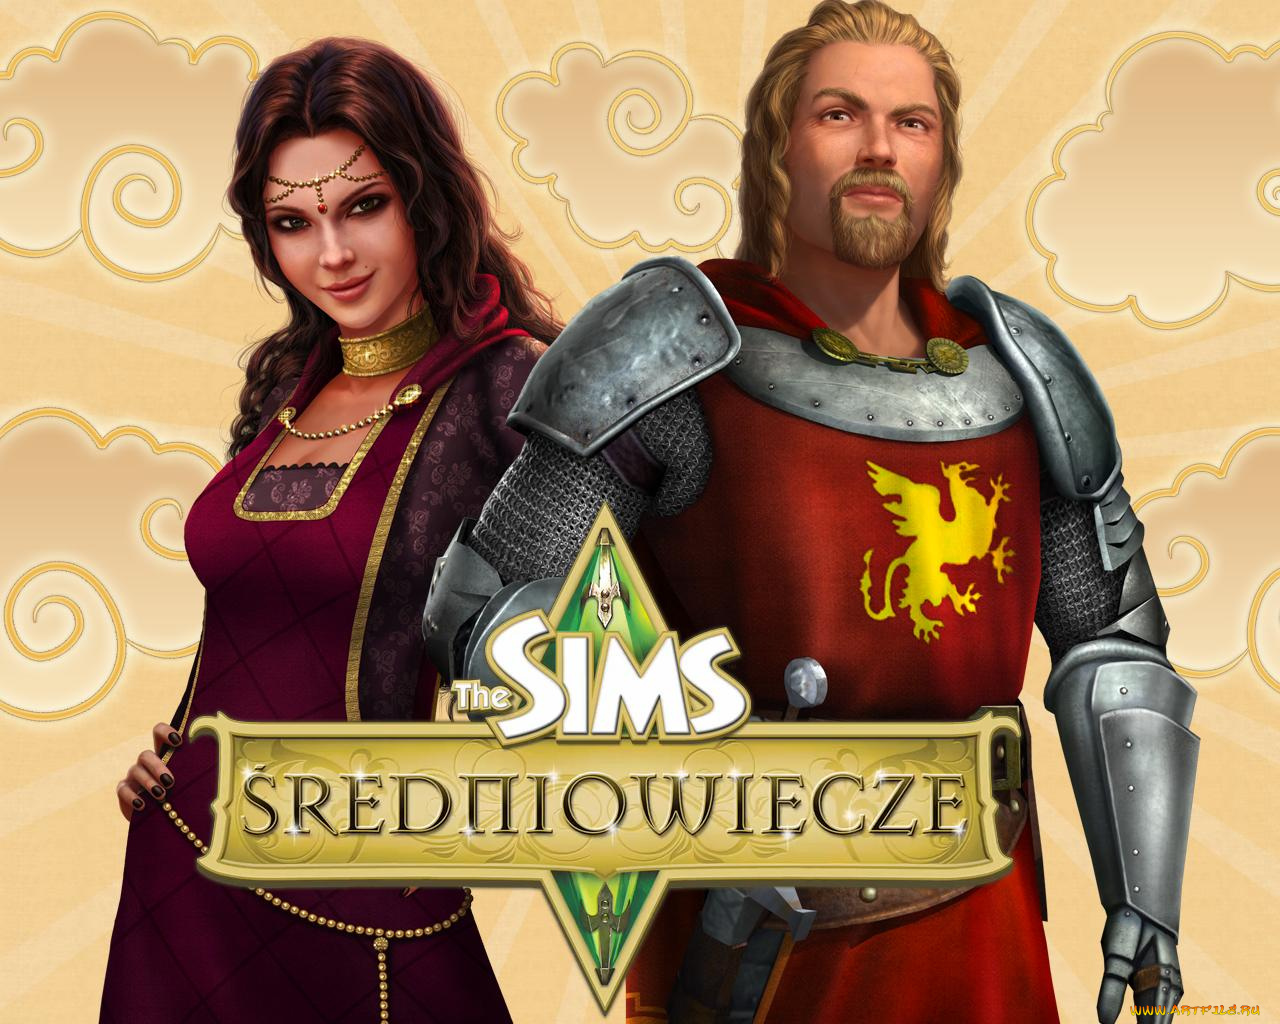 the, sims, medieval, видео, игры